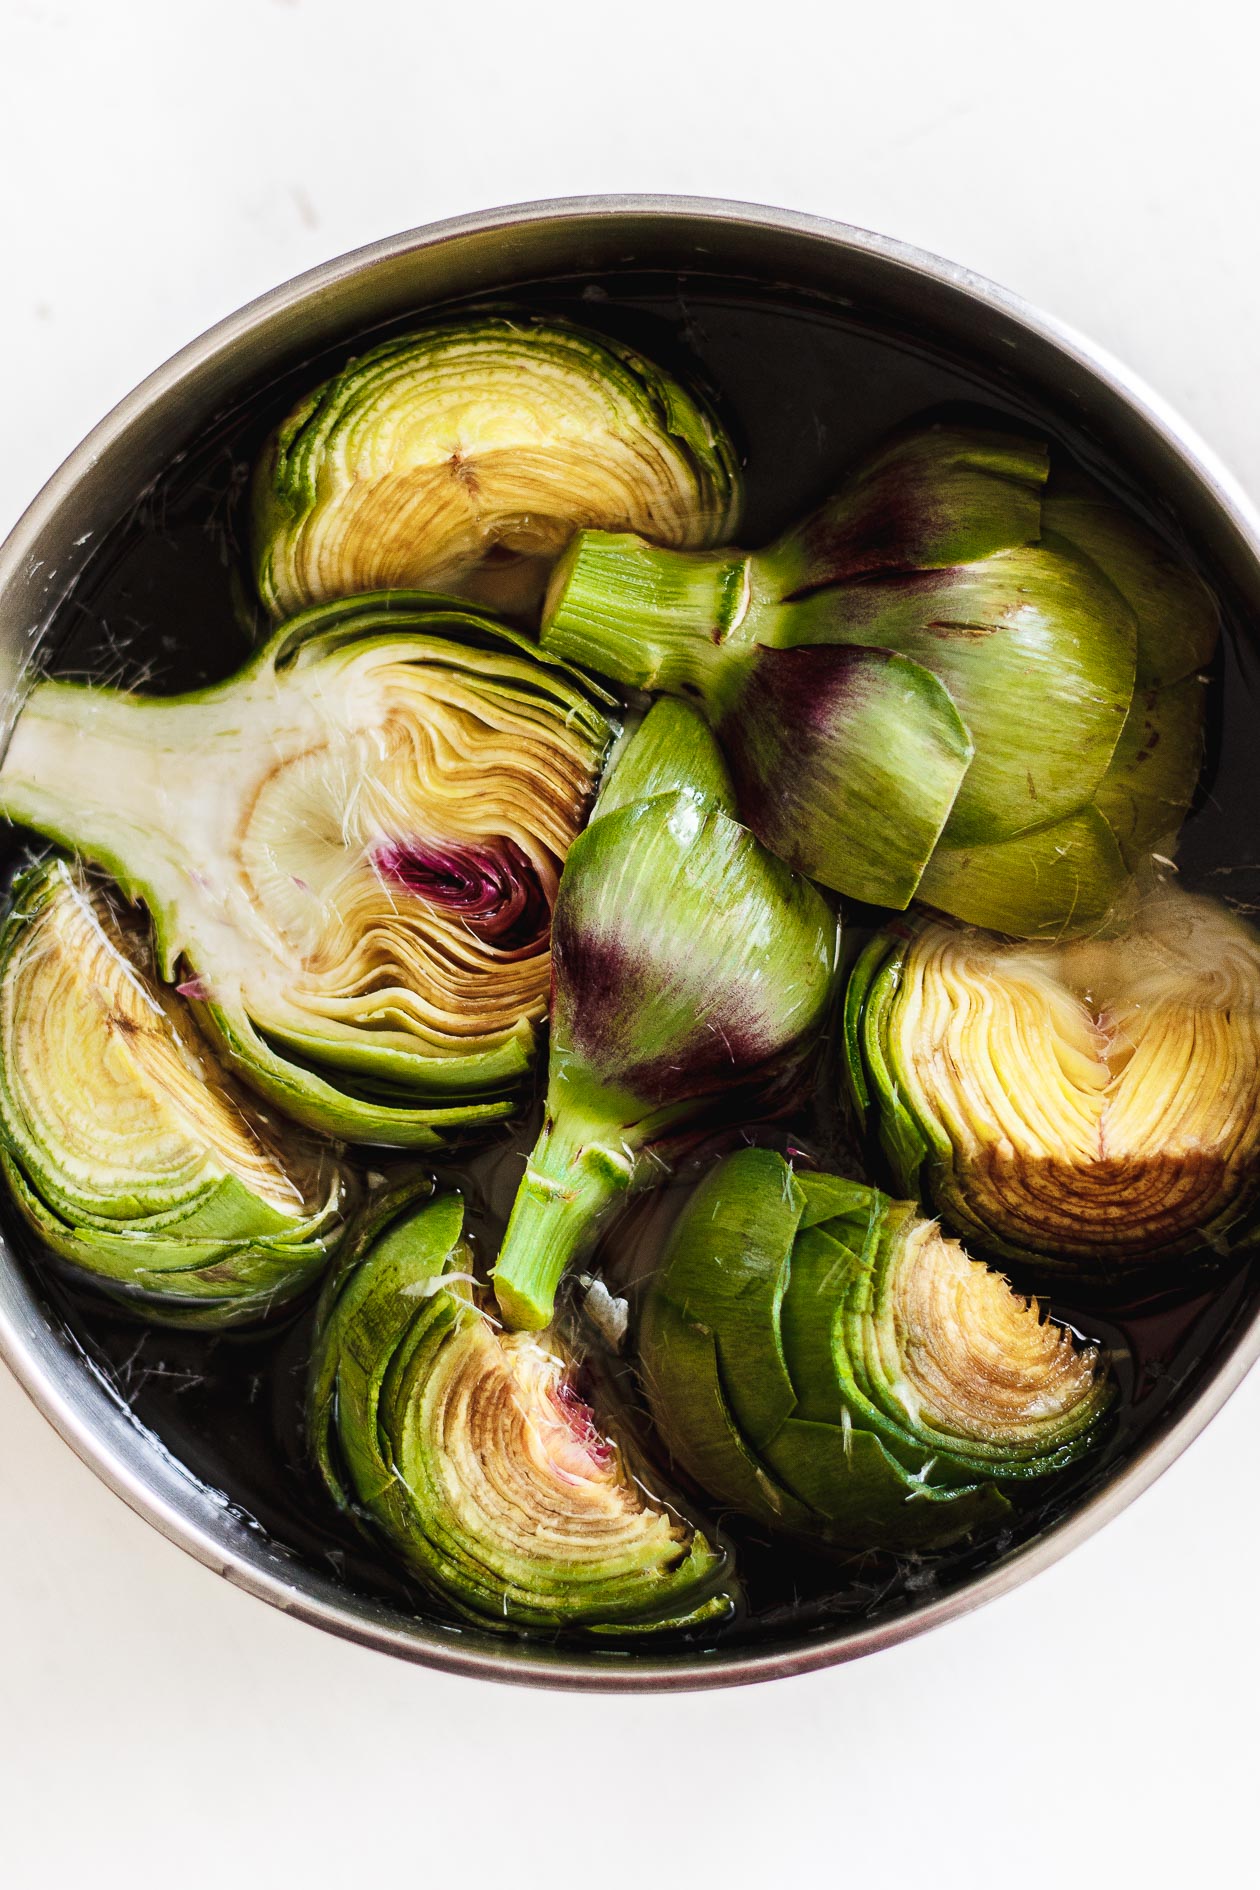 artichokes in a bowl of water